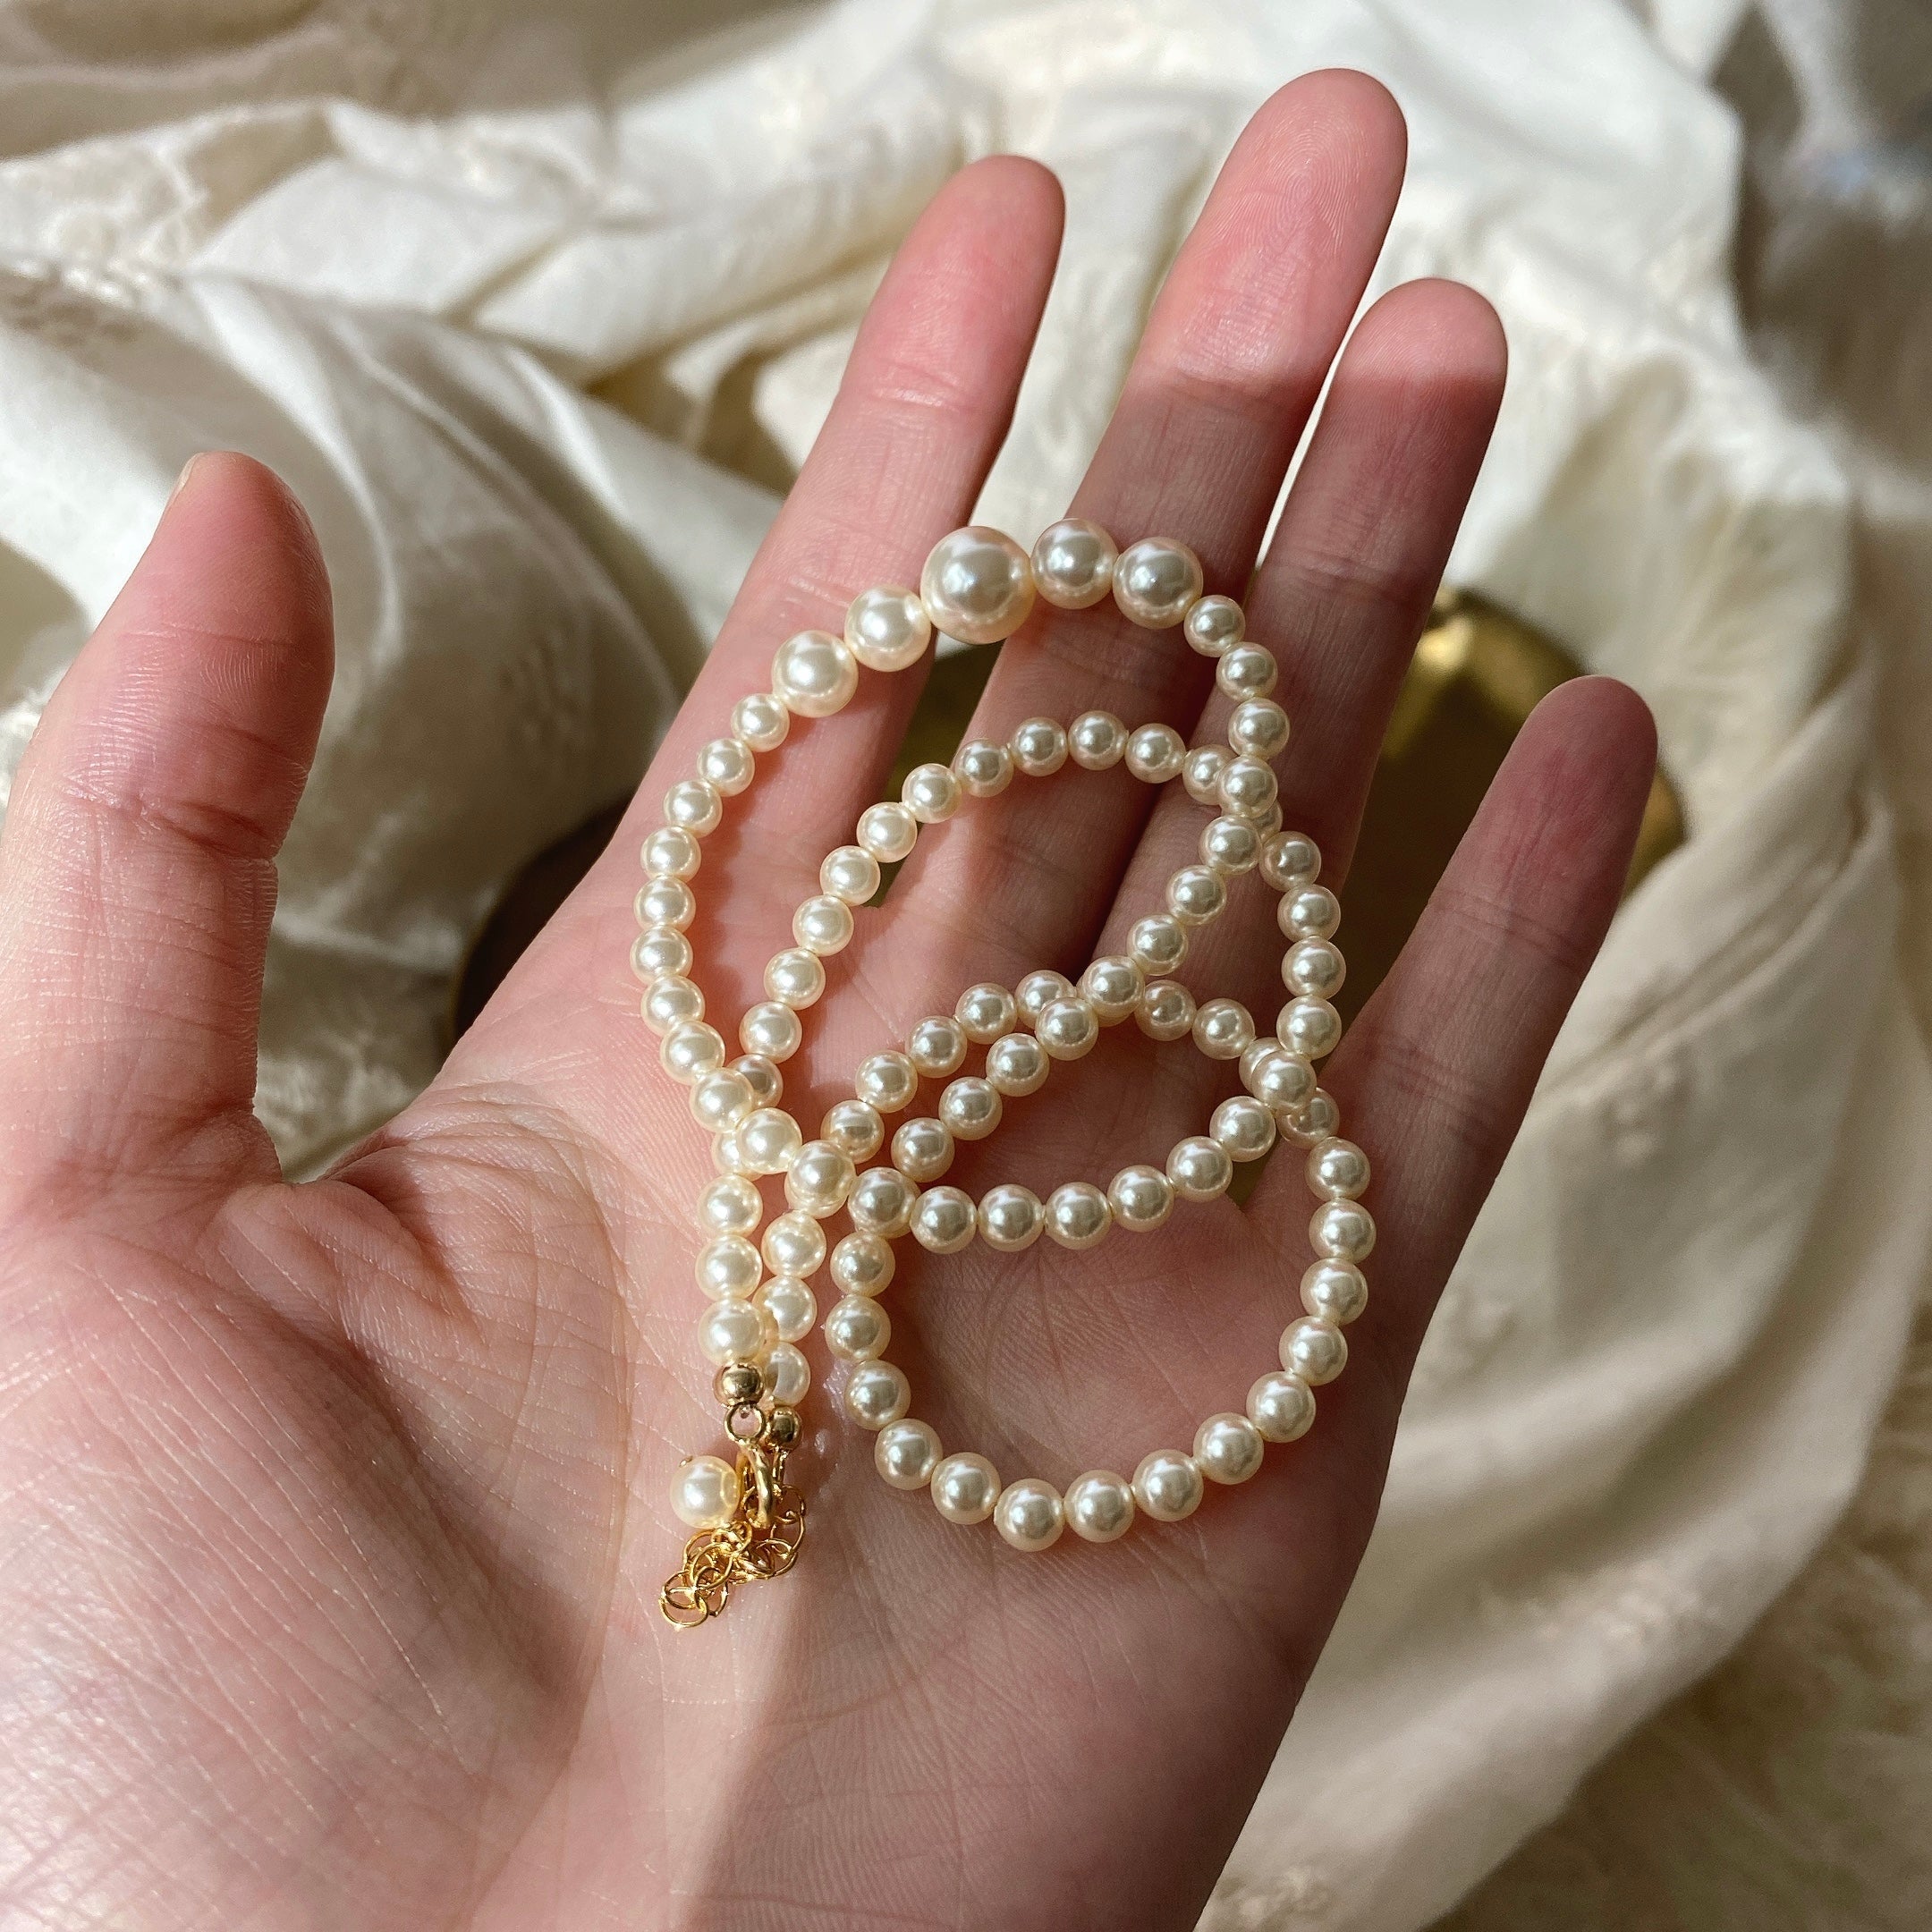 Handmade Artificial Pearls 14K Gold-Covered Necklace